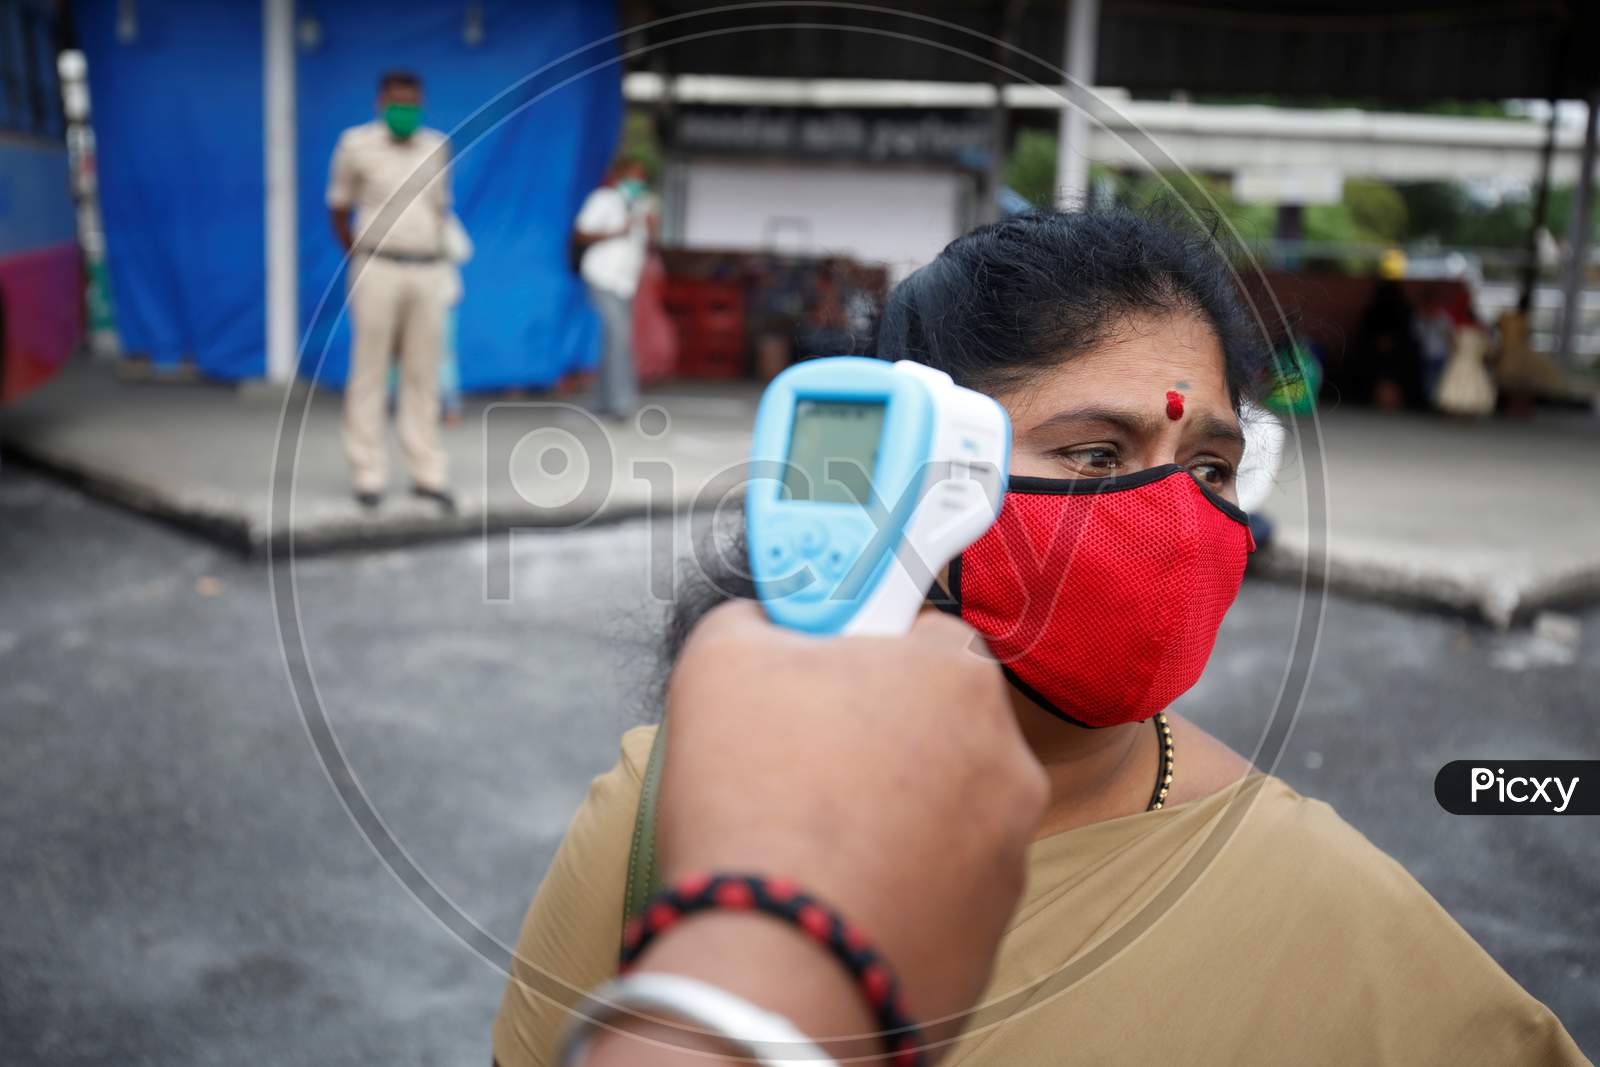 A woman gets her temperature checked before boarding a public transport bus after the state eased lockdown norms during the nationwide lockdown to prevent the spread of coronavirus (COVID-19) in Bangalore, India.